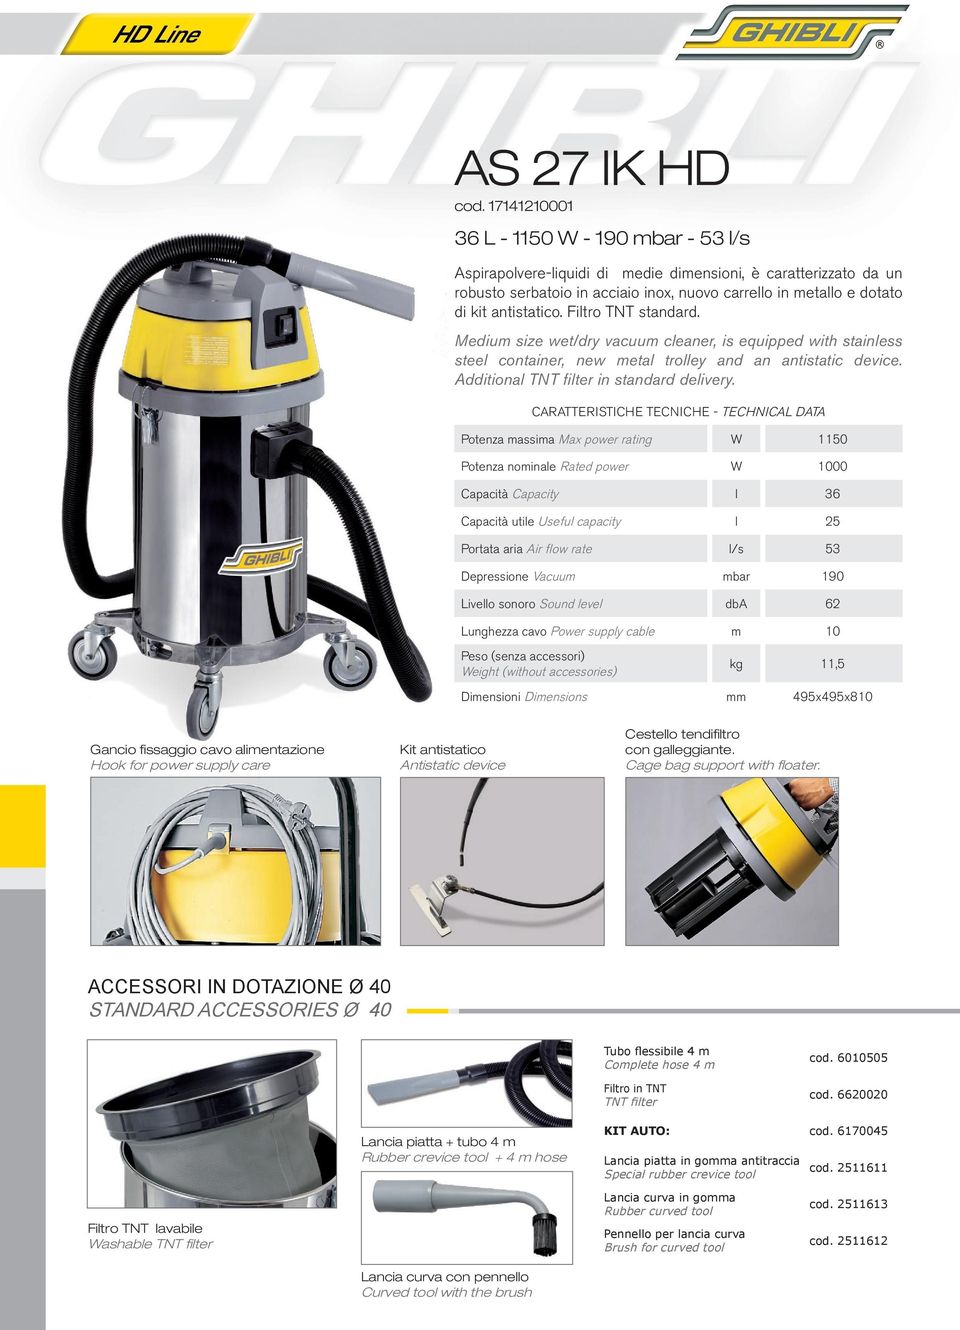 antistatico. Filtro TNT standard. Medium size wet/dry vacuum cleaner, is equipped with stainless steel container, new metal trolley and an antistatic device.